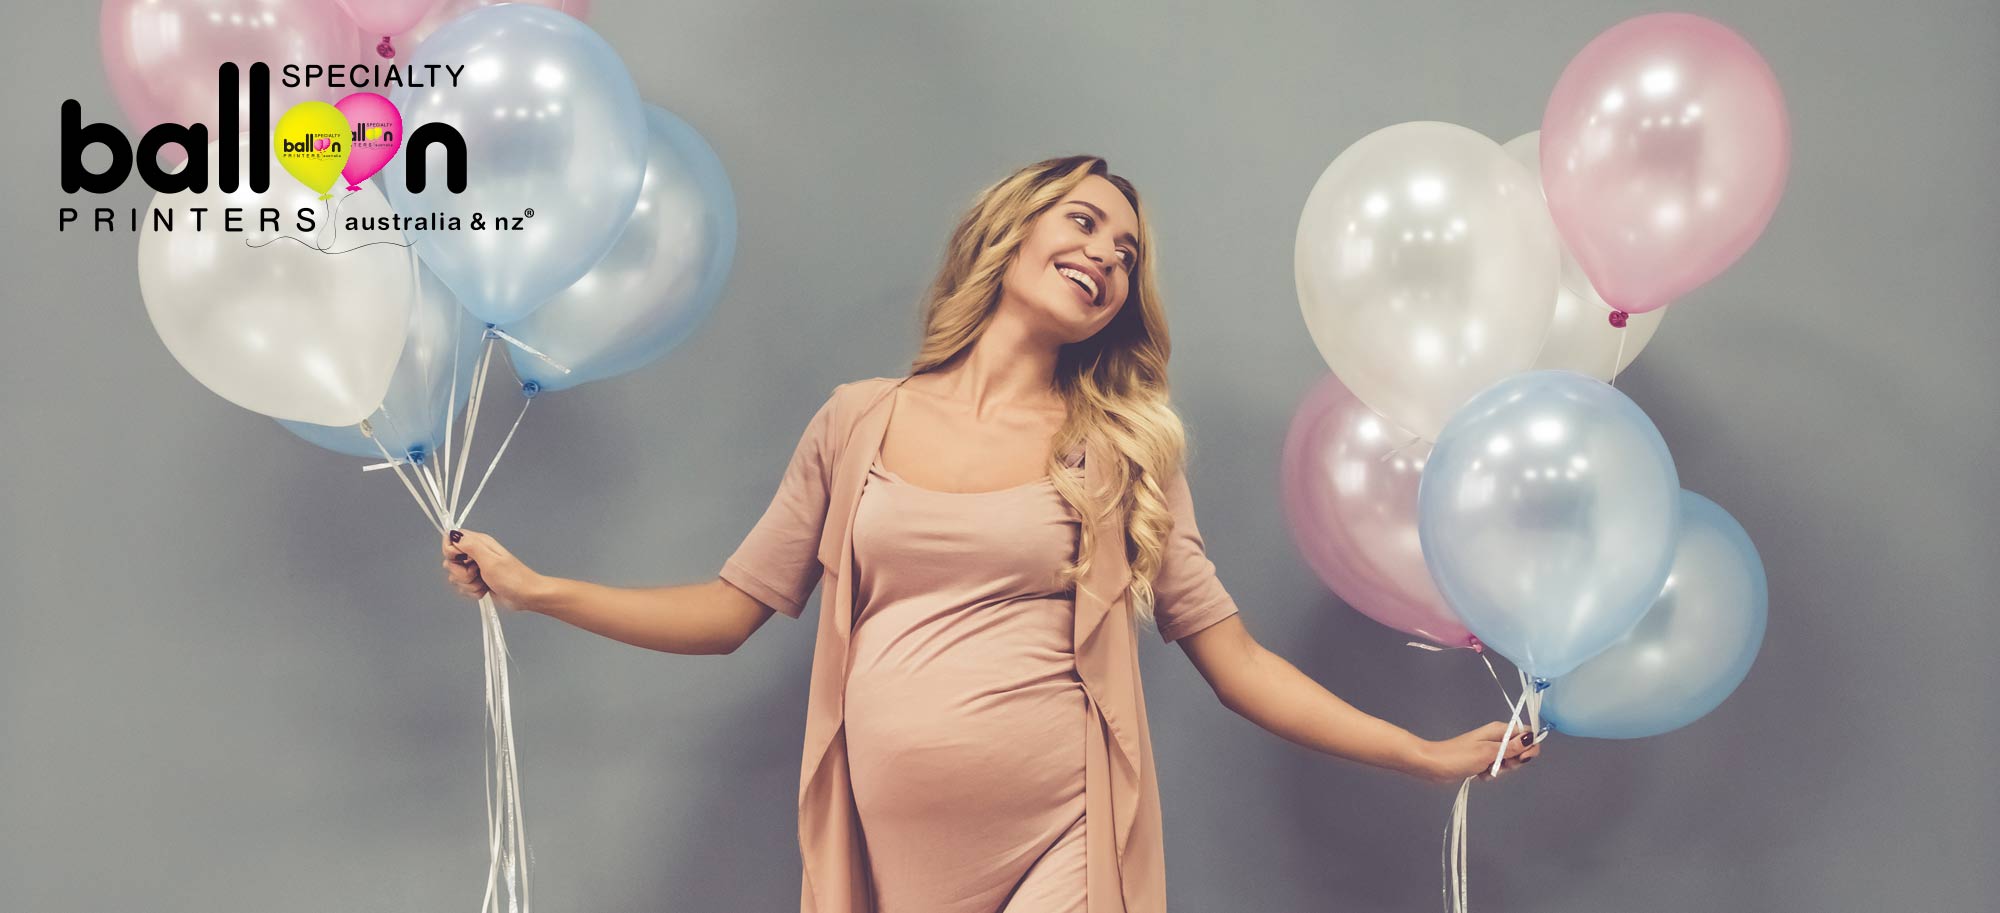 Specialty Balloon Printers 7 Top Tips For Planning The Perfect Baby Shower